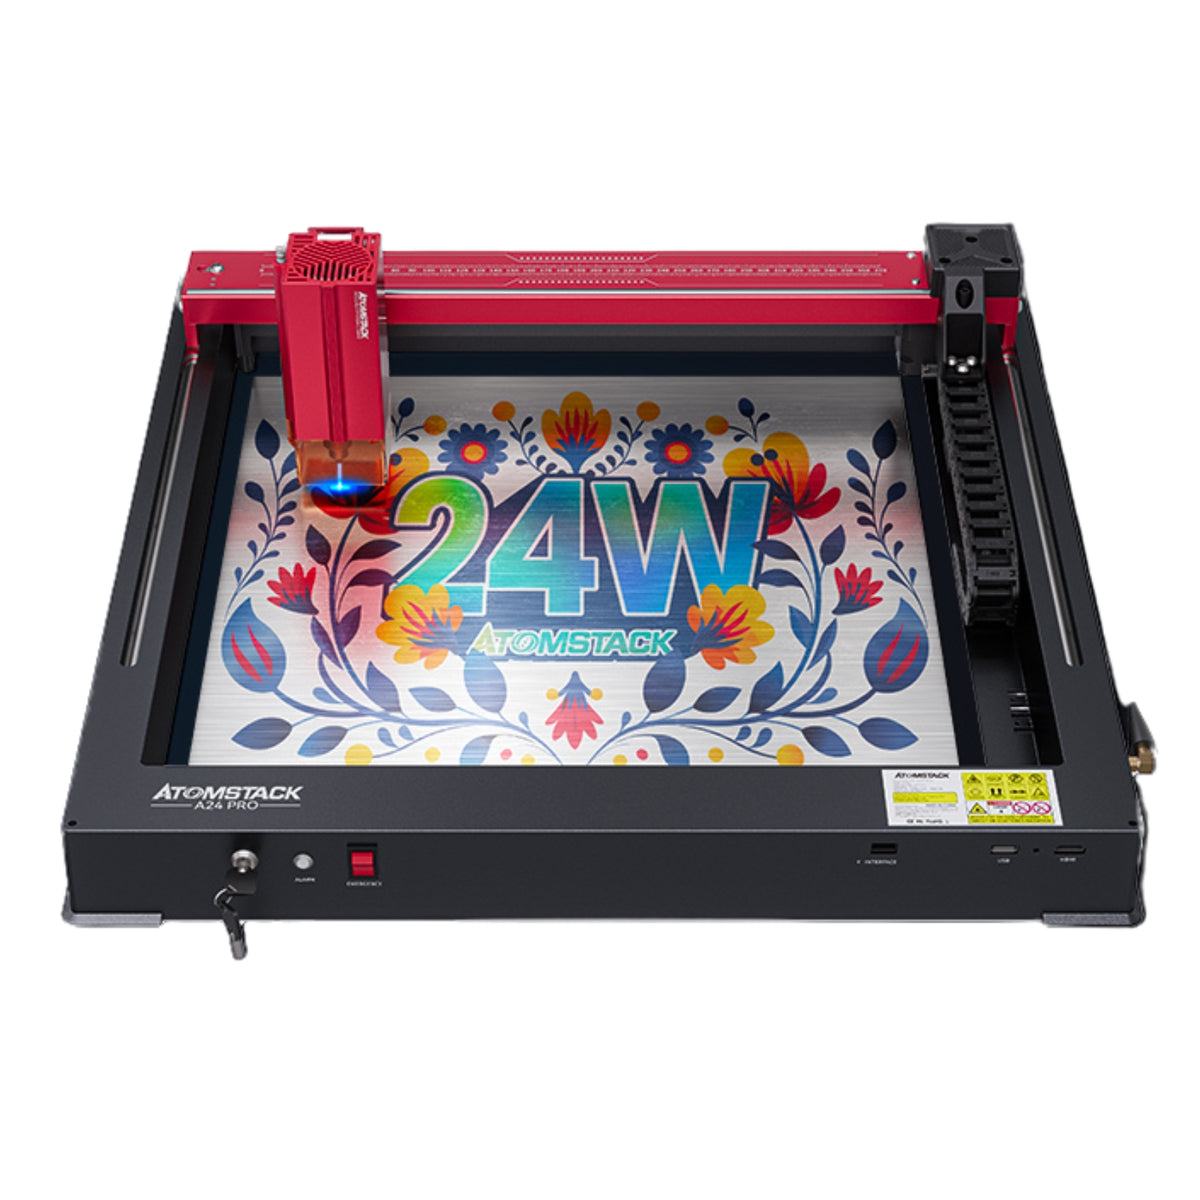 Now's a Fantastic Time to Grab a Laser Cutter Black Friday Deal - CNET